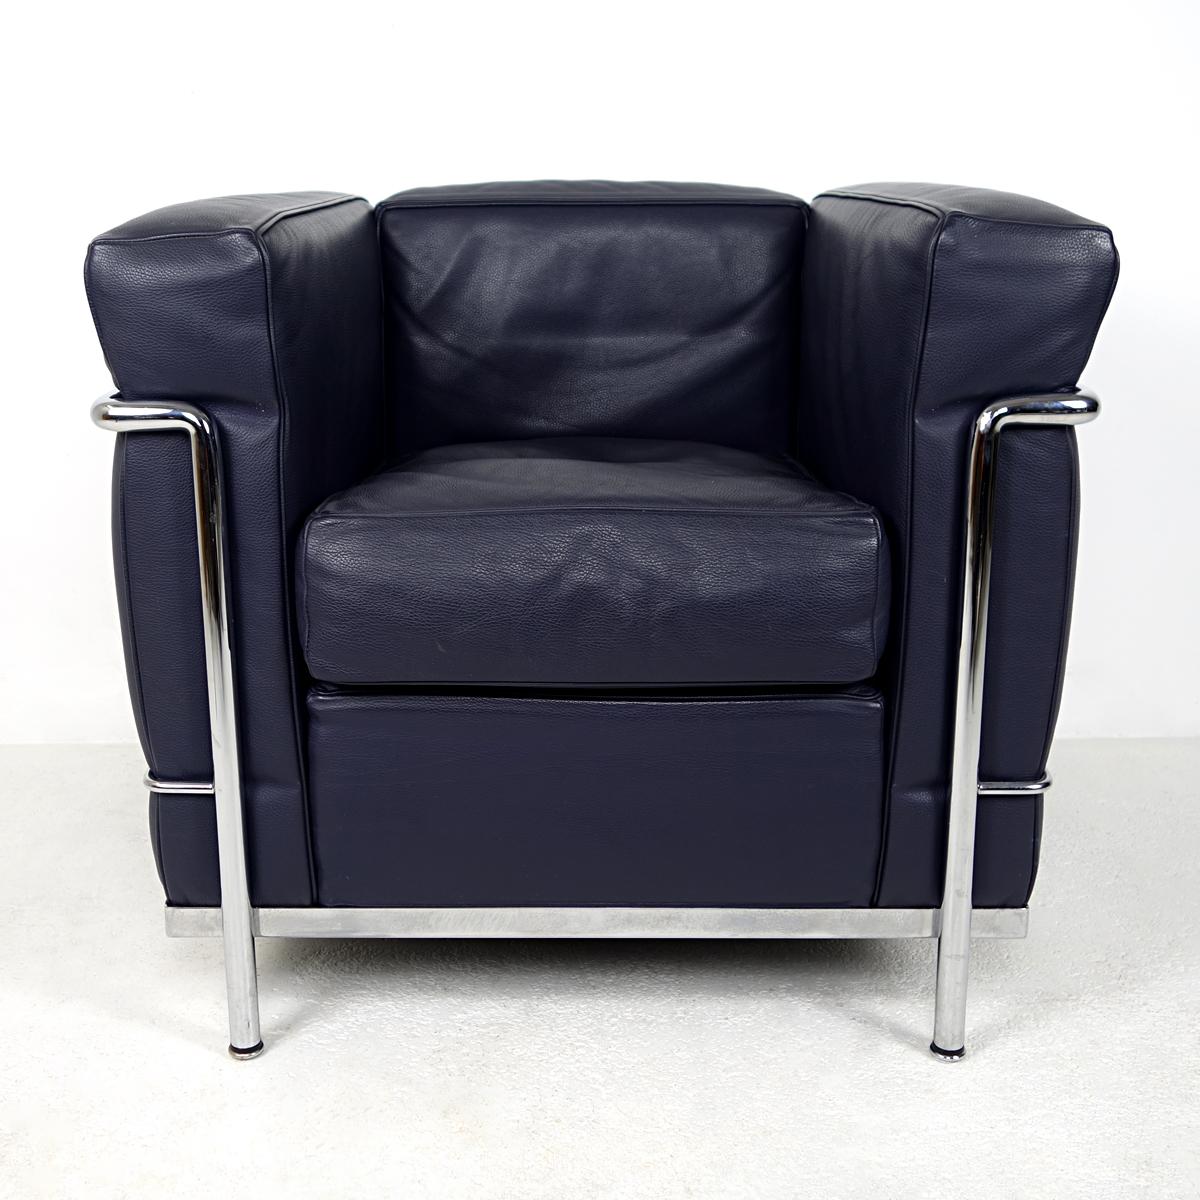 Armchair LC2 Petit Modèle with polished chrome frame and separate very deep blue leather cushions, LCX leather, the more exclusive version.
The LC2 was designed in 1928 by Le Corbusier and Charlotte Perriand and ever since it has been the